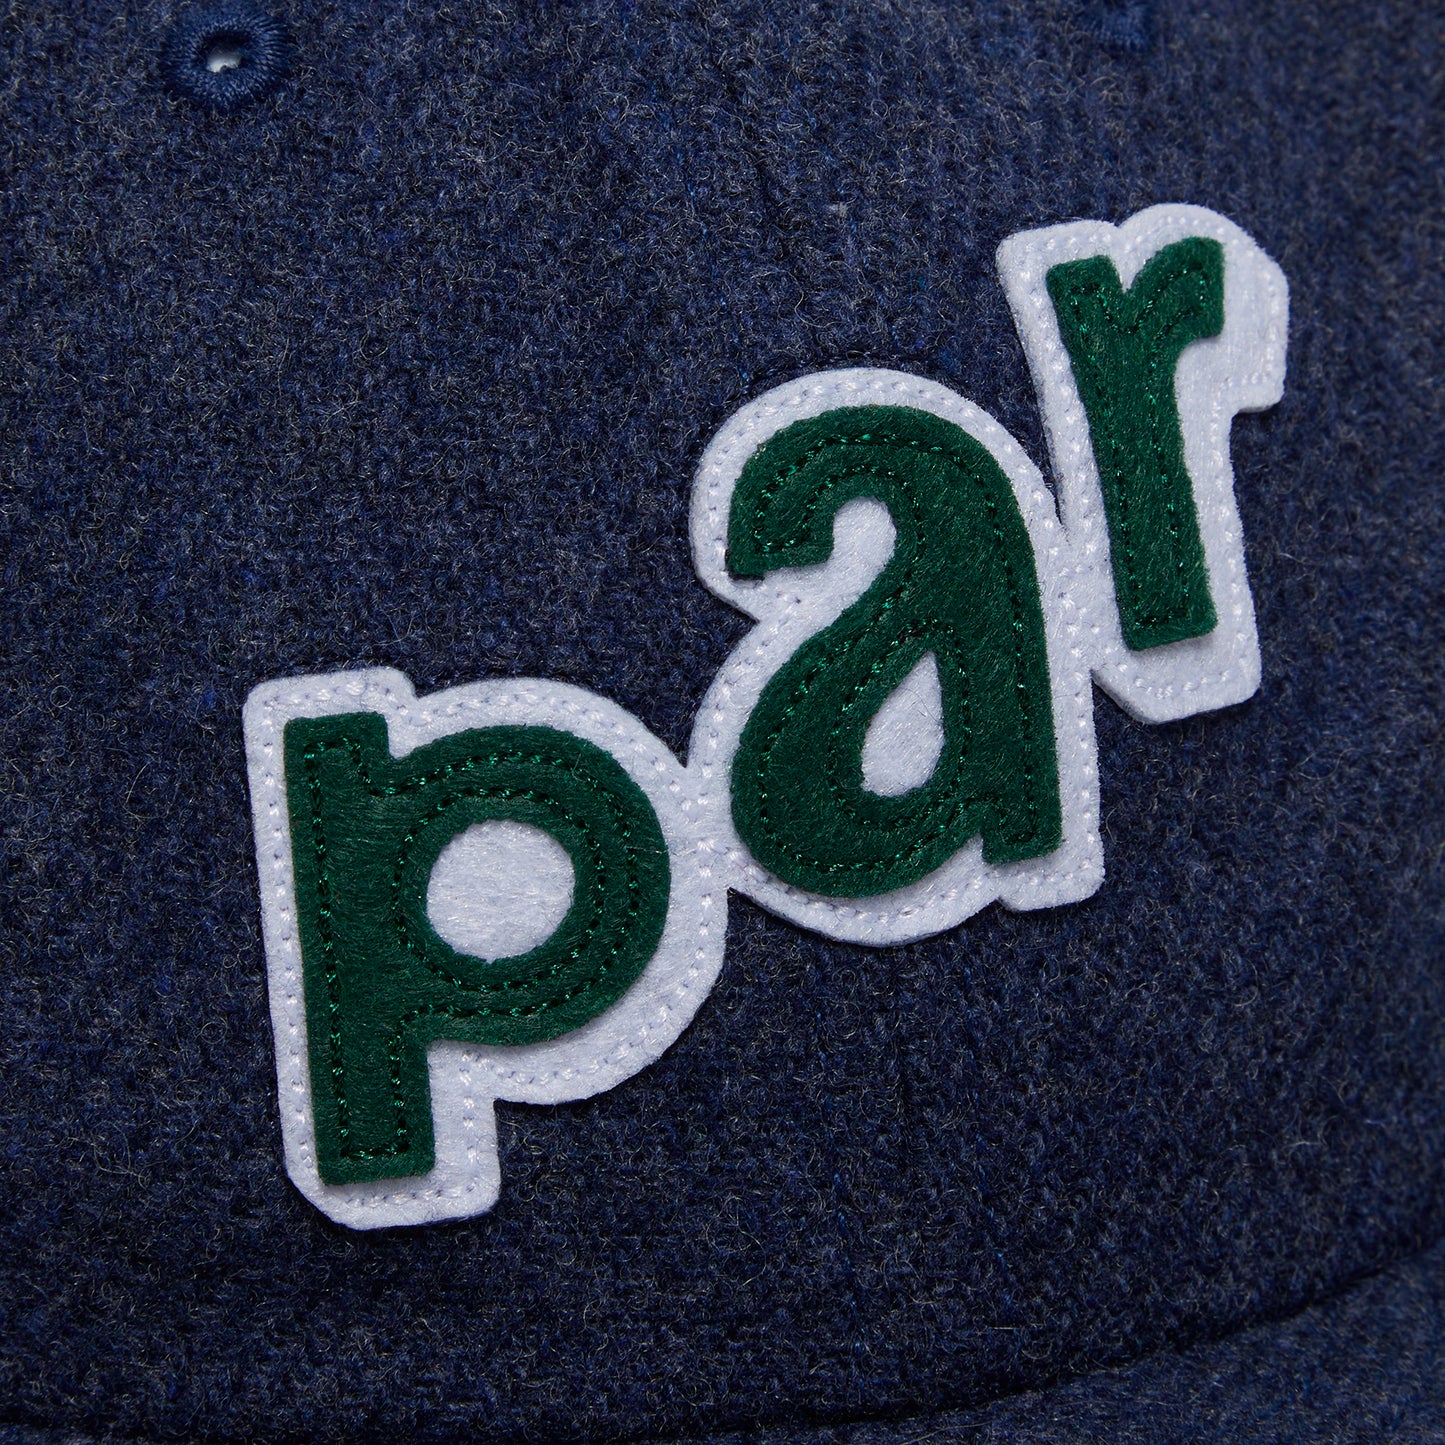 by Parra Loudness 6 Panel Hat (Dark Navy)